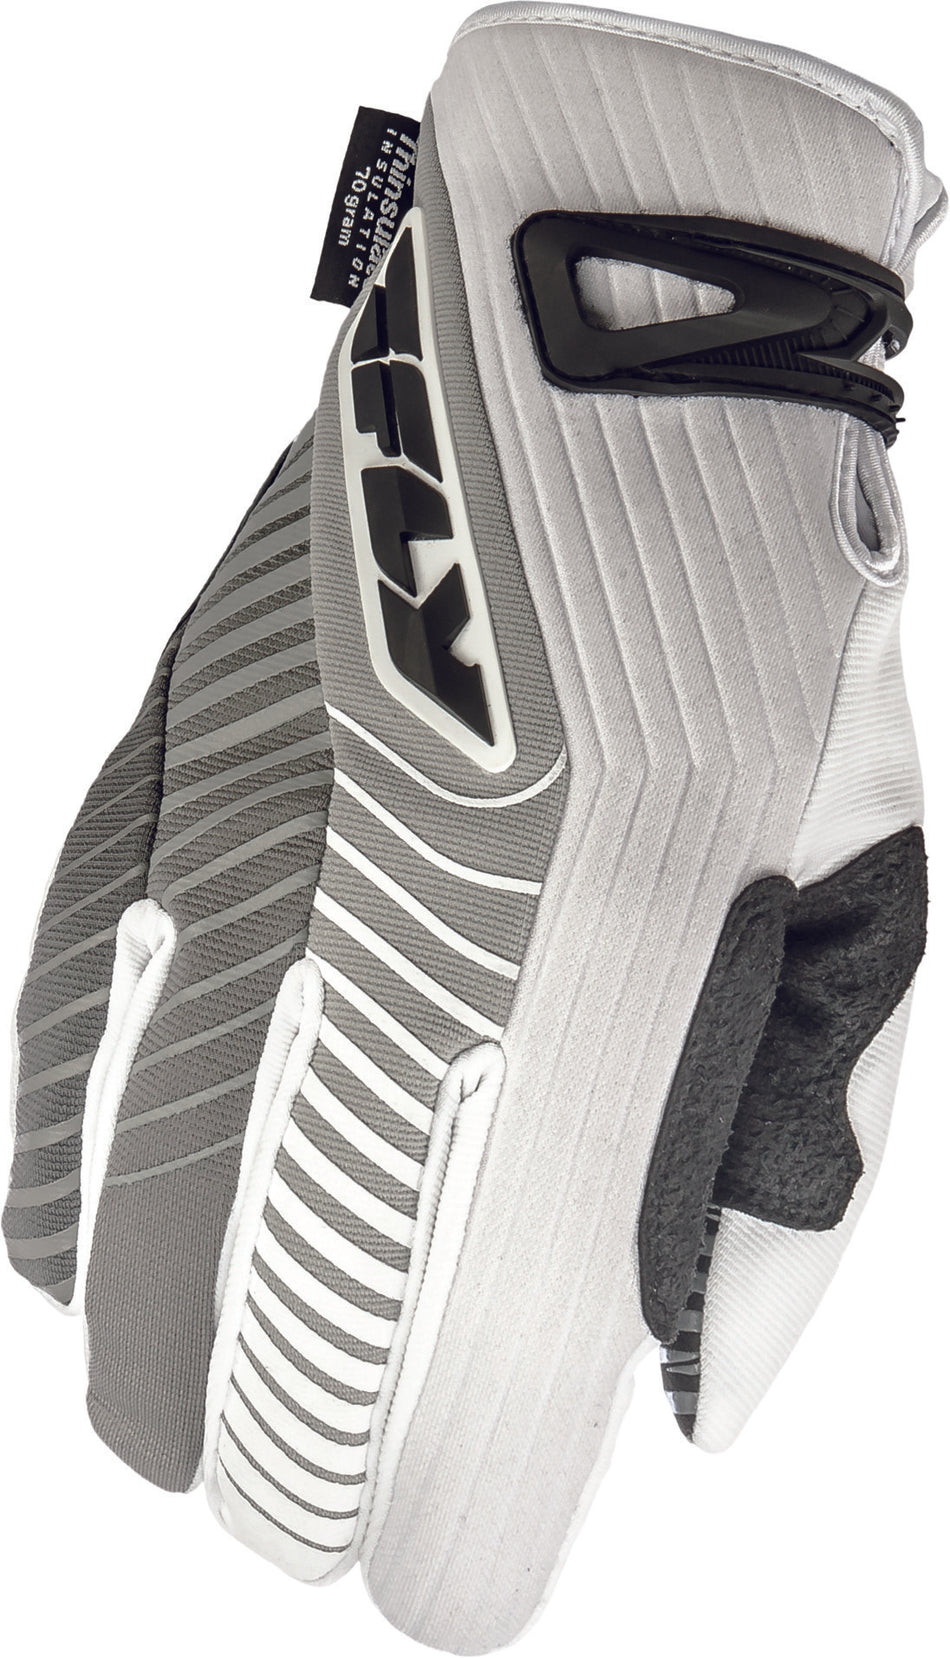 FLY RACING Title Gloves Long White Sz 8 #5884 367-034~08